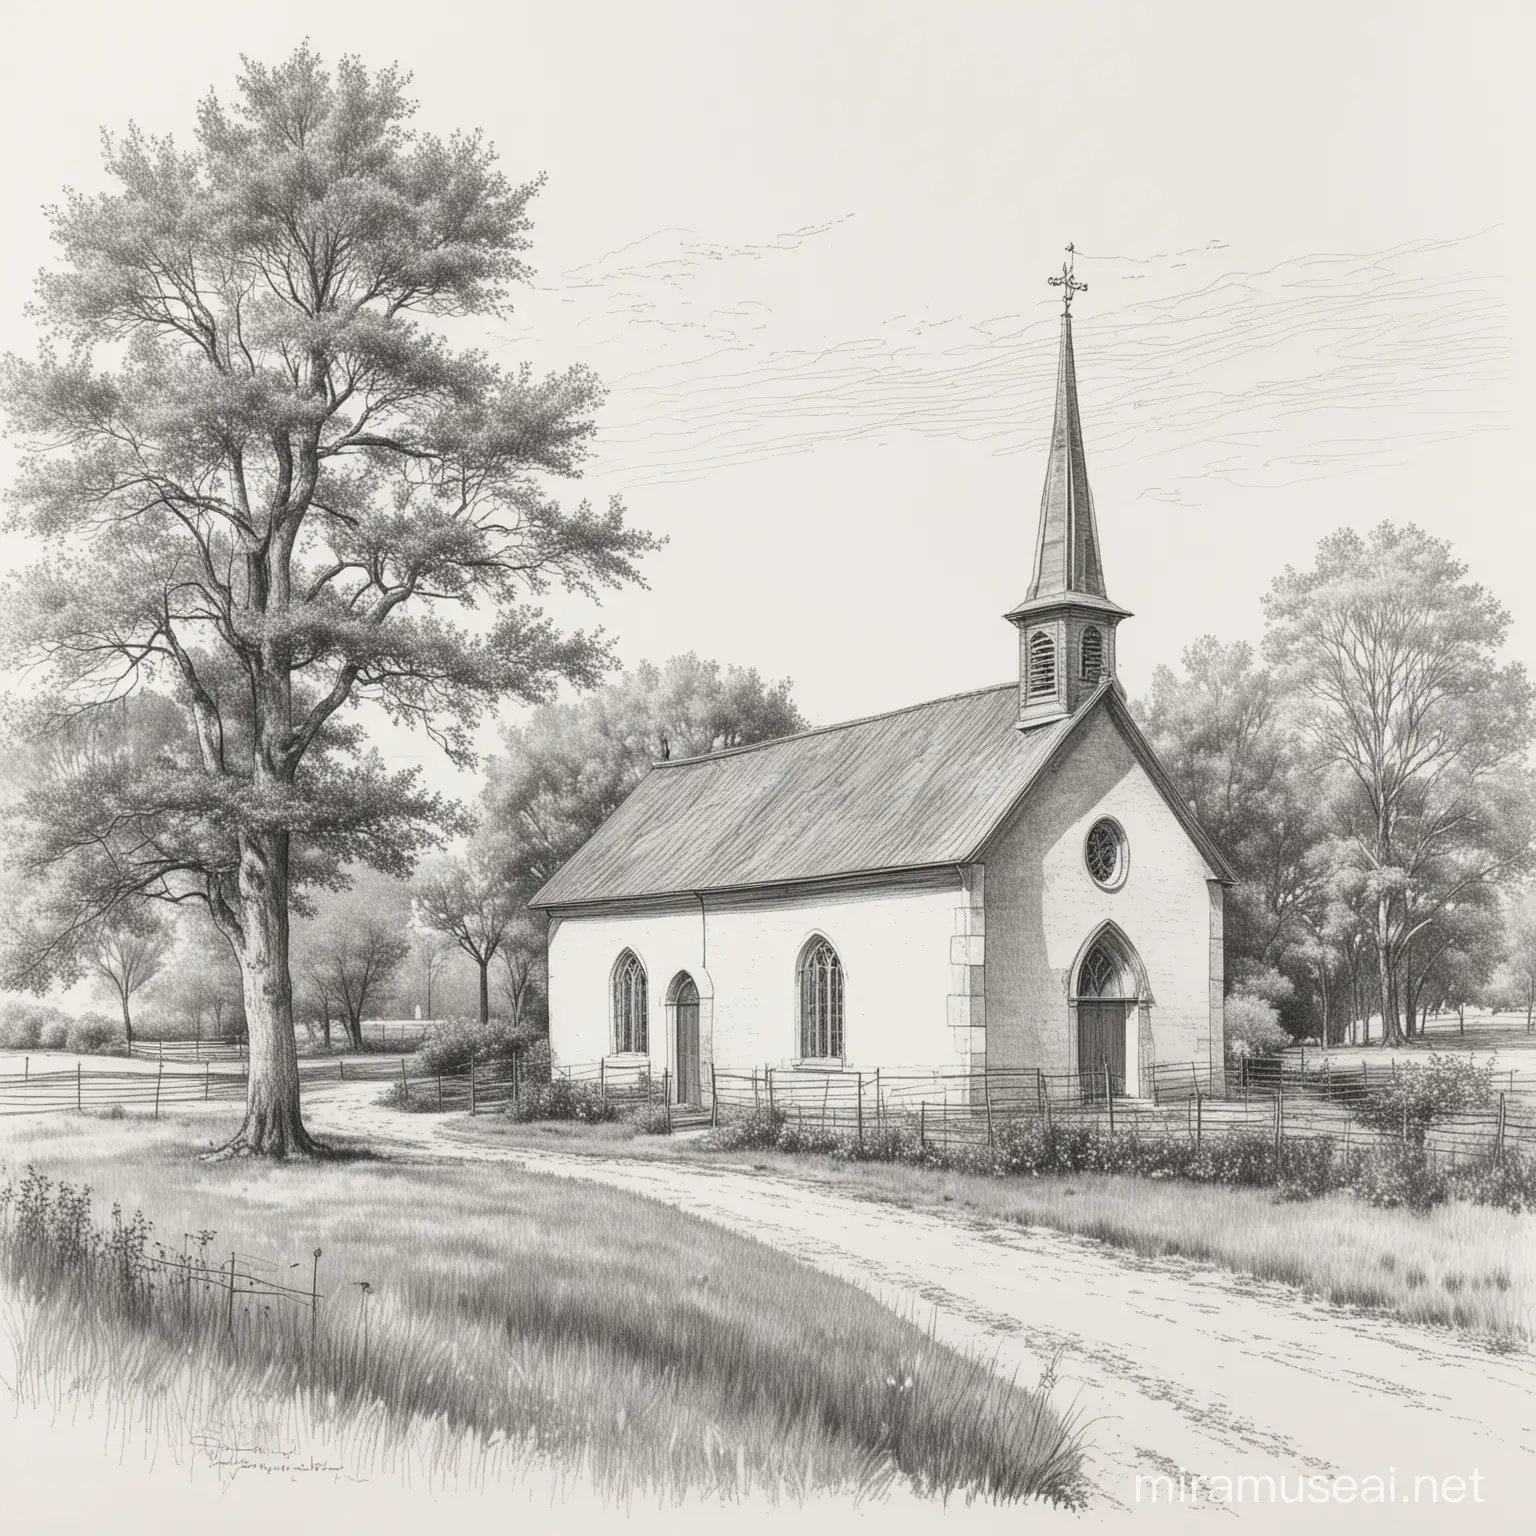 Rustic Sketch of Petitre Line Country Chapel Amidst Lush Greenery